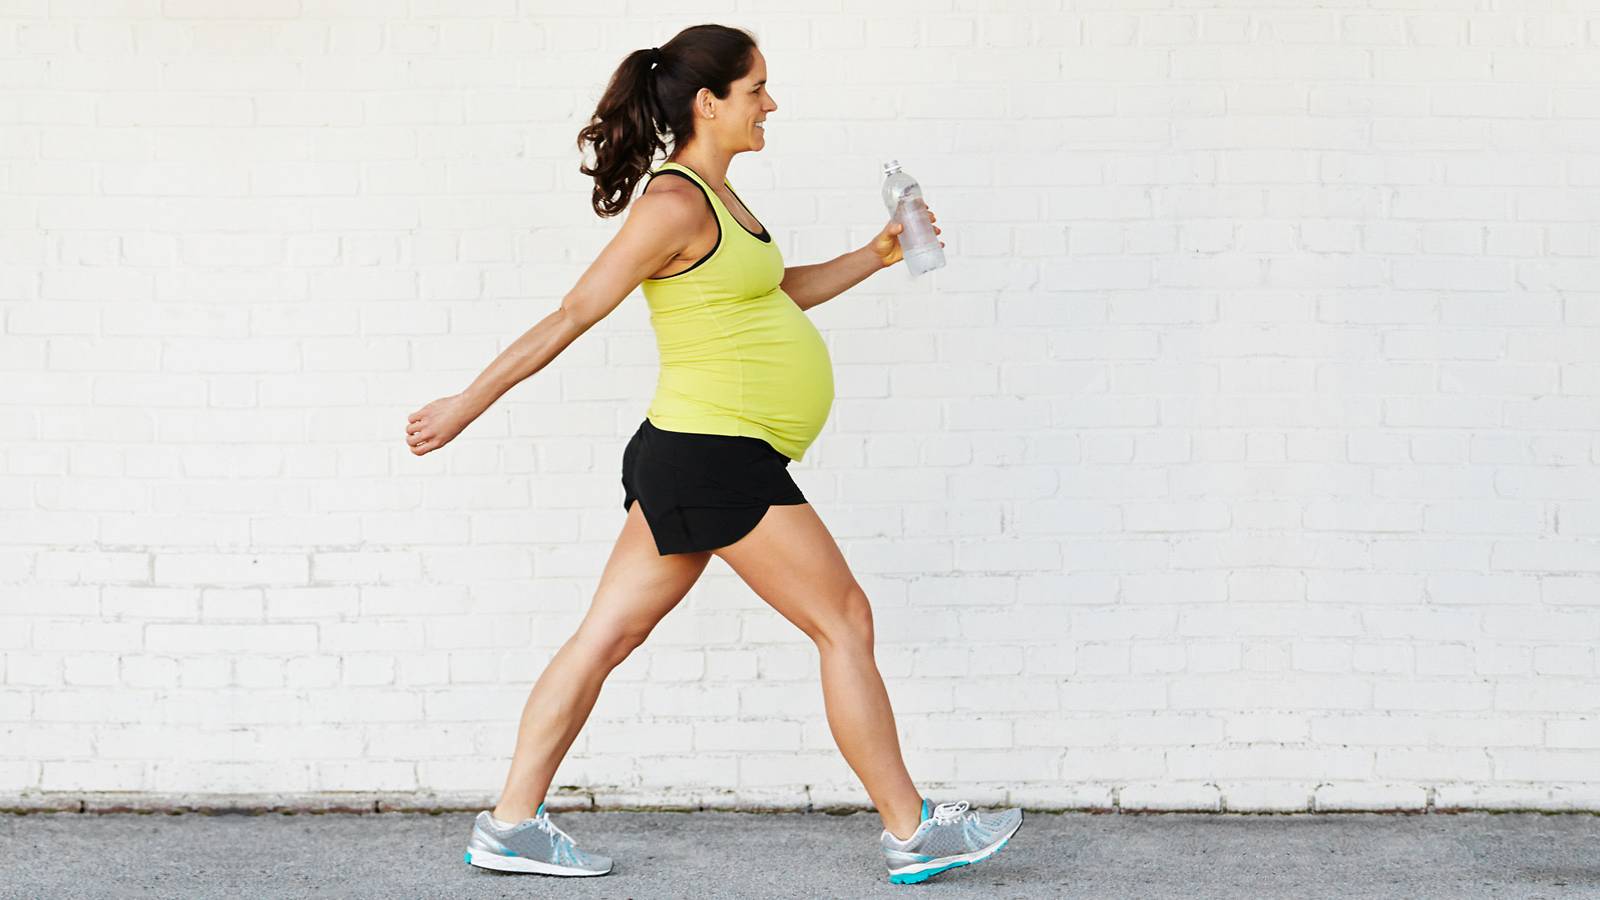 Pregnancy-Top-exercises-to-benefit-baby-bump-and-you-2